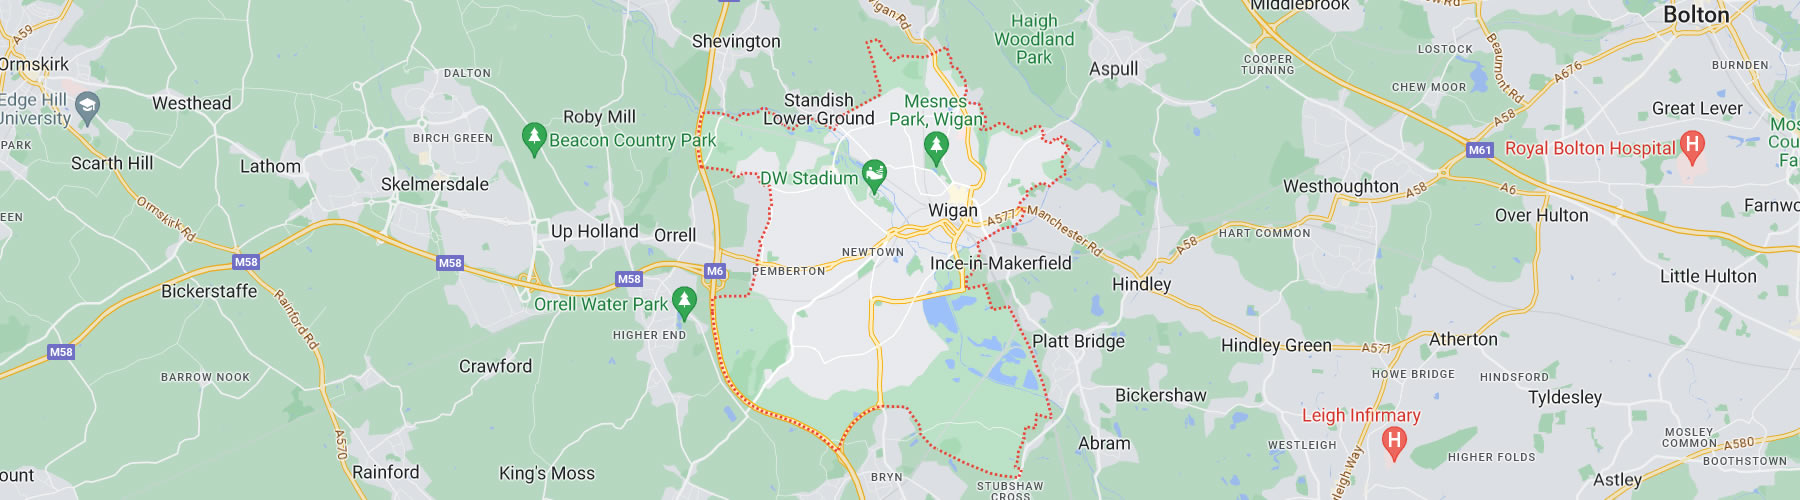 map of wigan area covered for oven cleaning in wigan